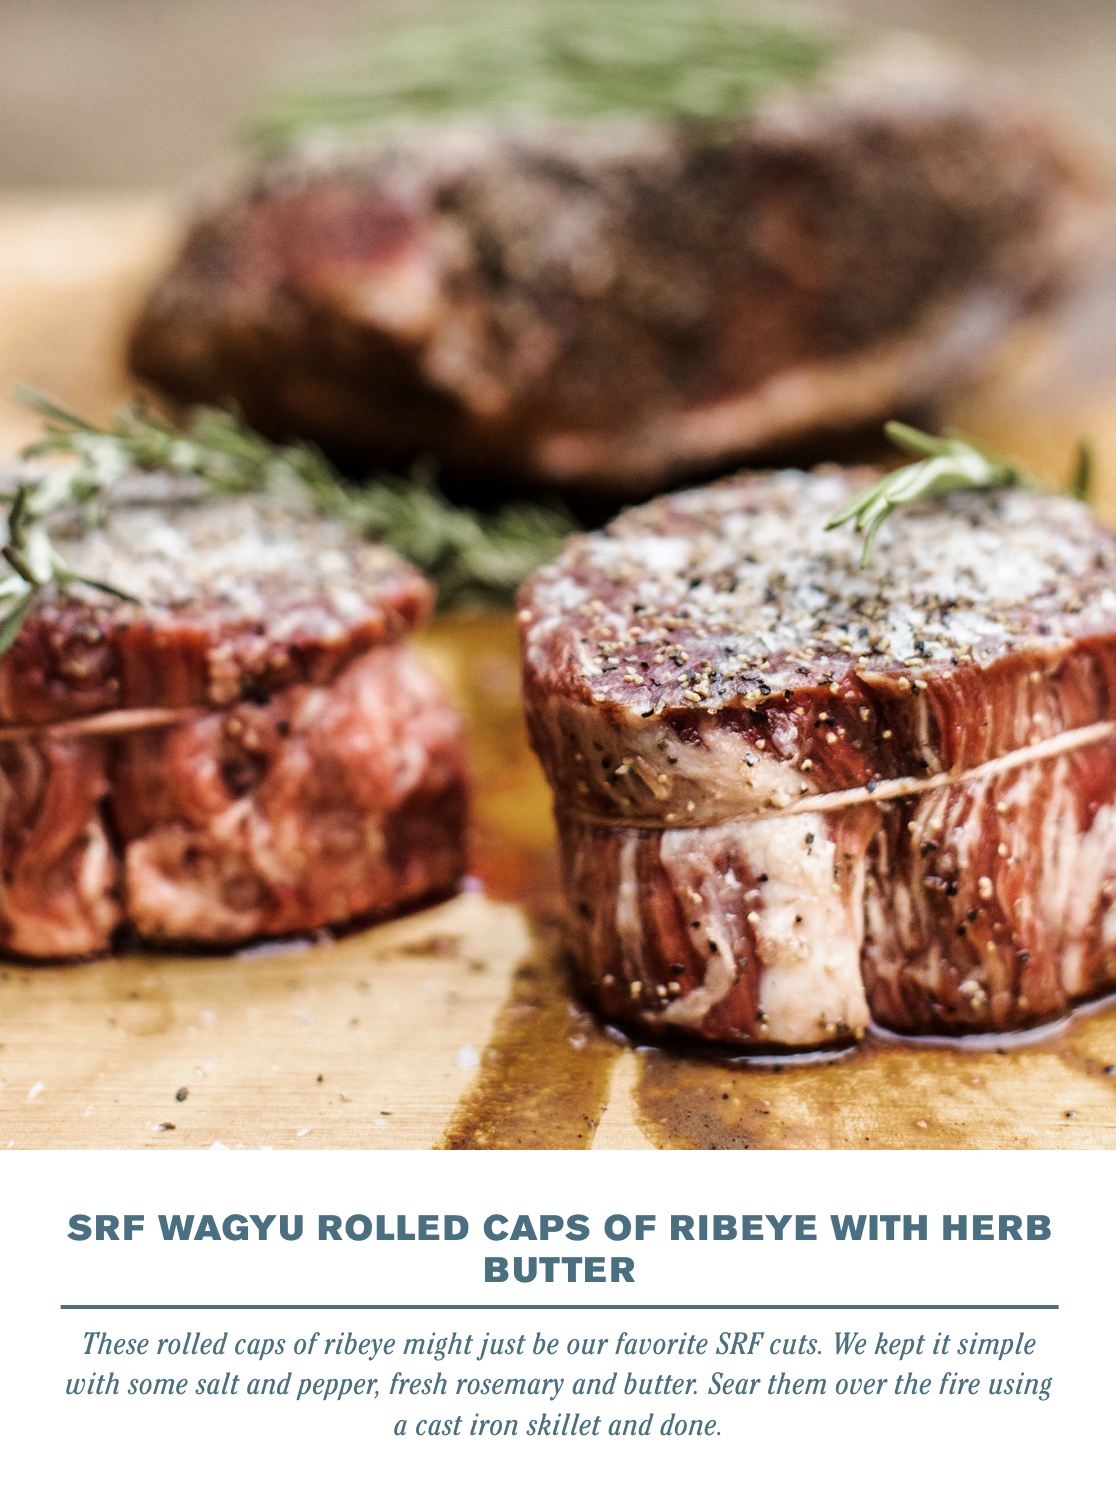  SRF WAGYU ROLLED CAPS OF RIBEYE WITH HERB BUTTER&nbsp;    These rolled caps of ribeye might just be our favorite SRF cuts. We kept it simple with some salt and petter, fresh rosemary and butter. Sear them over the fire using a cast iron skillet and 